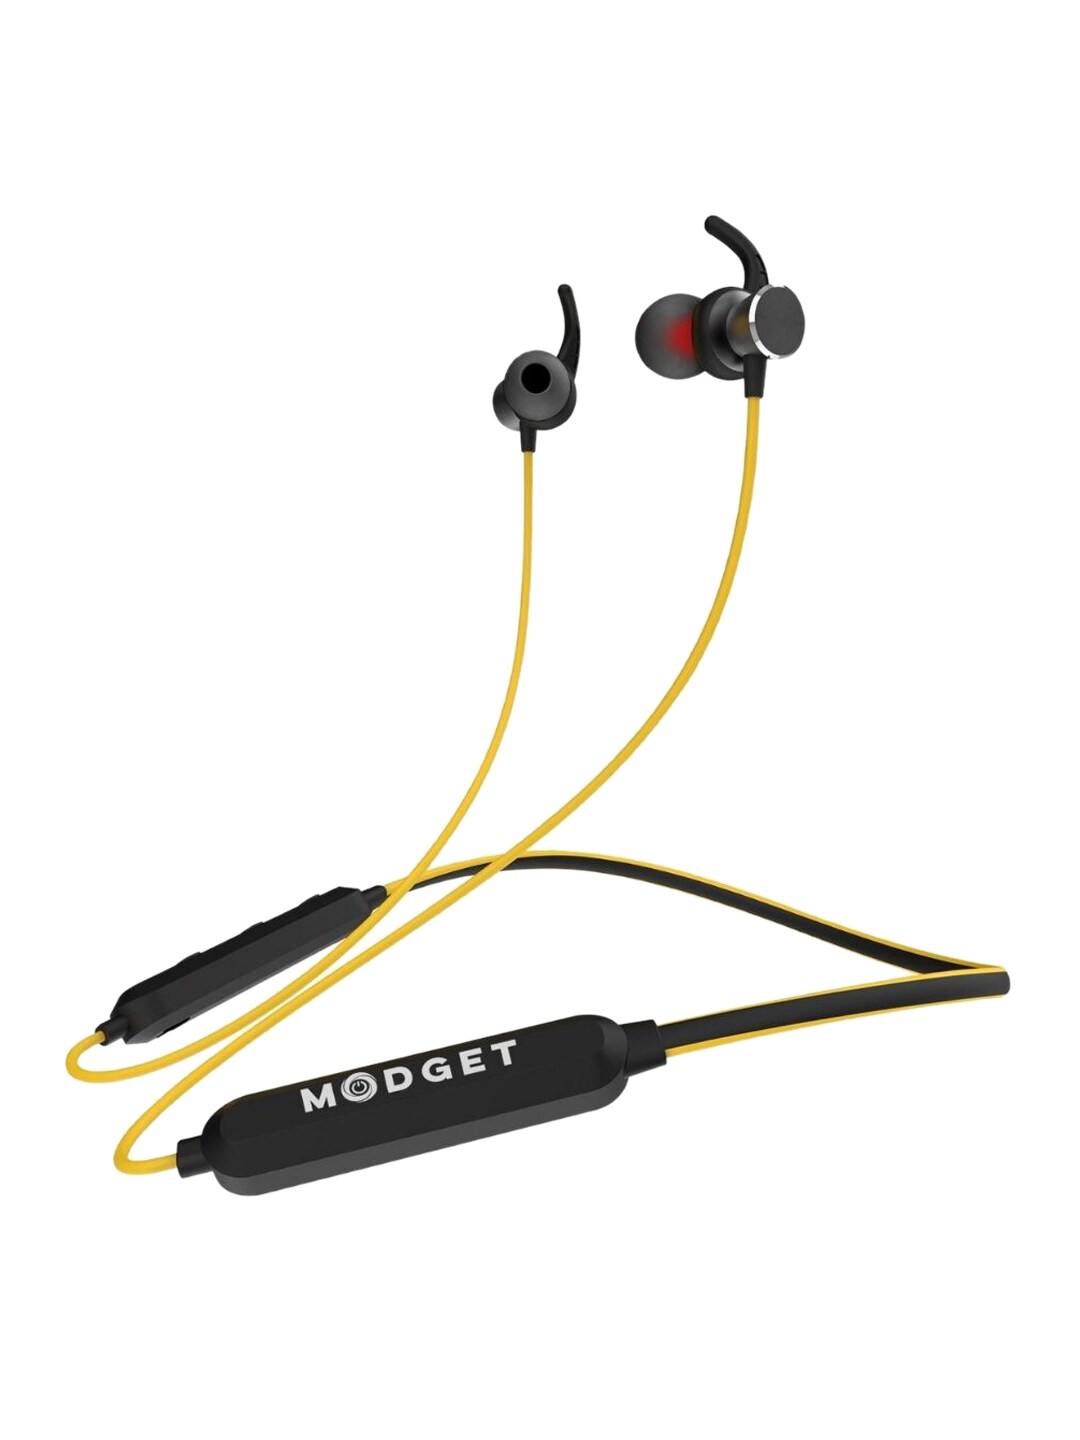 MODGET Black & Yellow Solid Neckband Bluetooth Headset Price in India